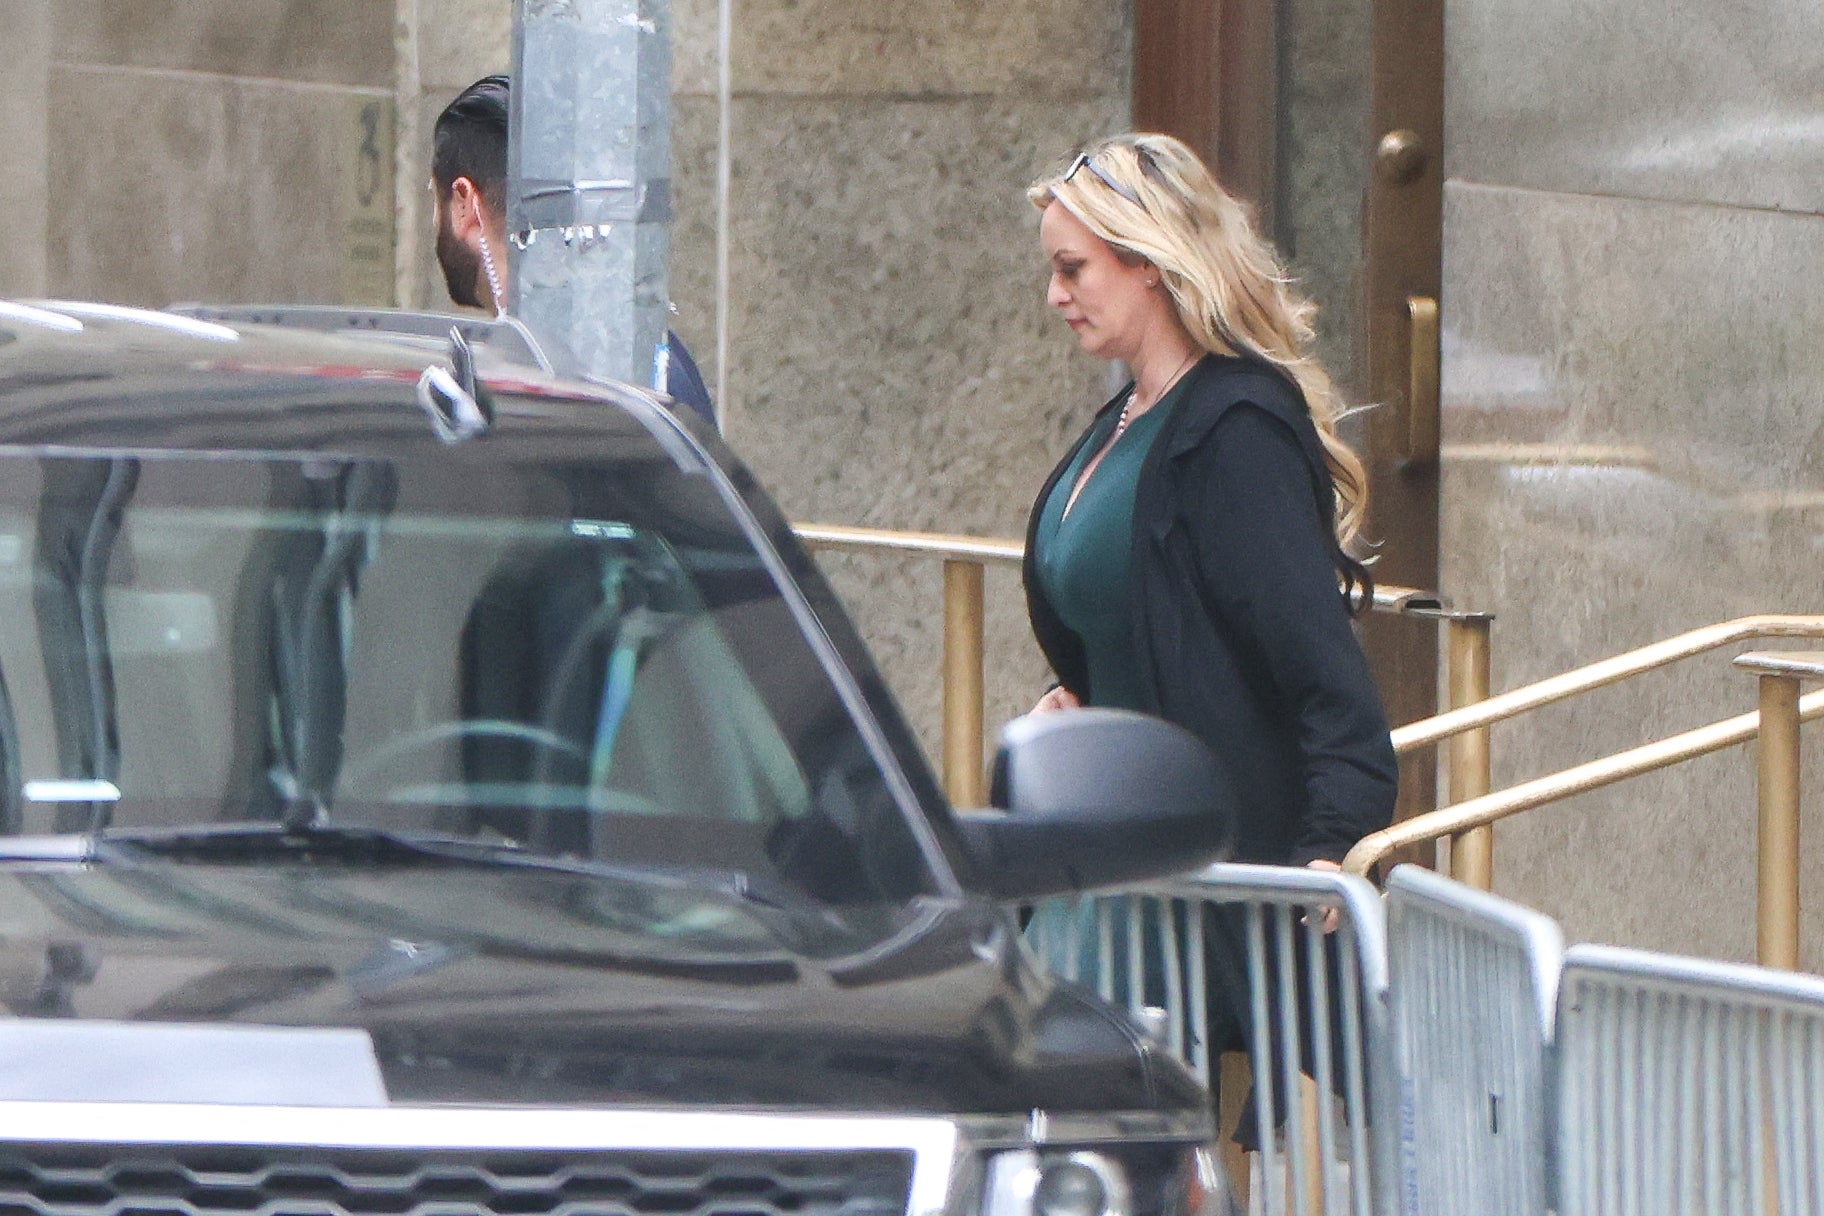 Stormy Daniels, pictured leaving court after testifying in Donald Trump’s trial, has some advice for Melania Trump